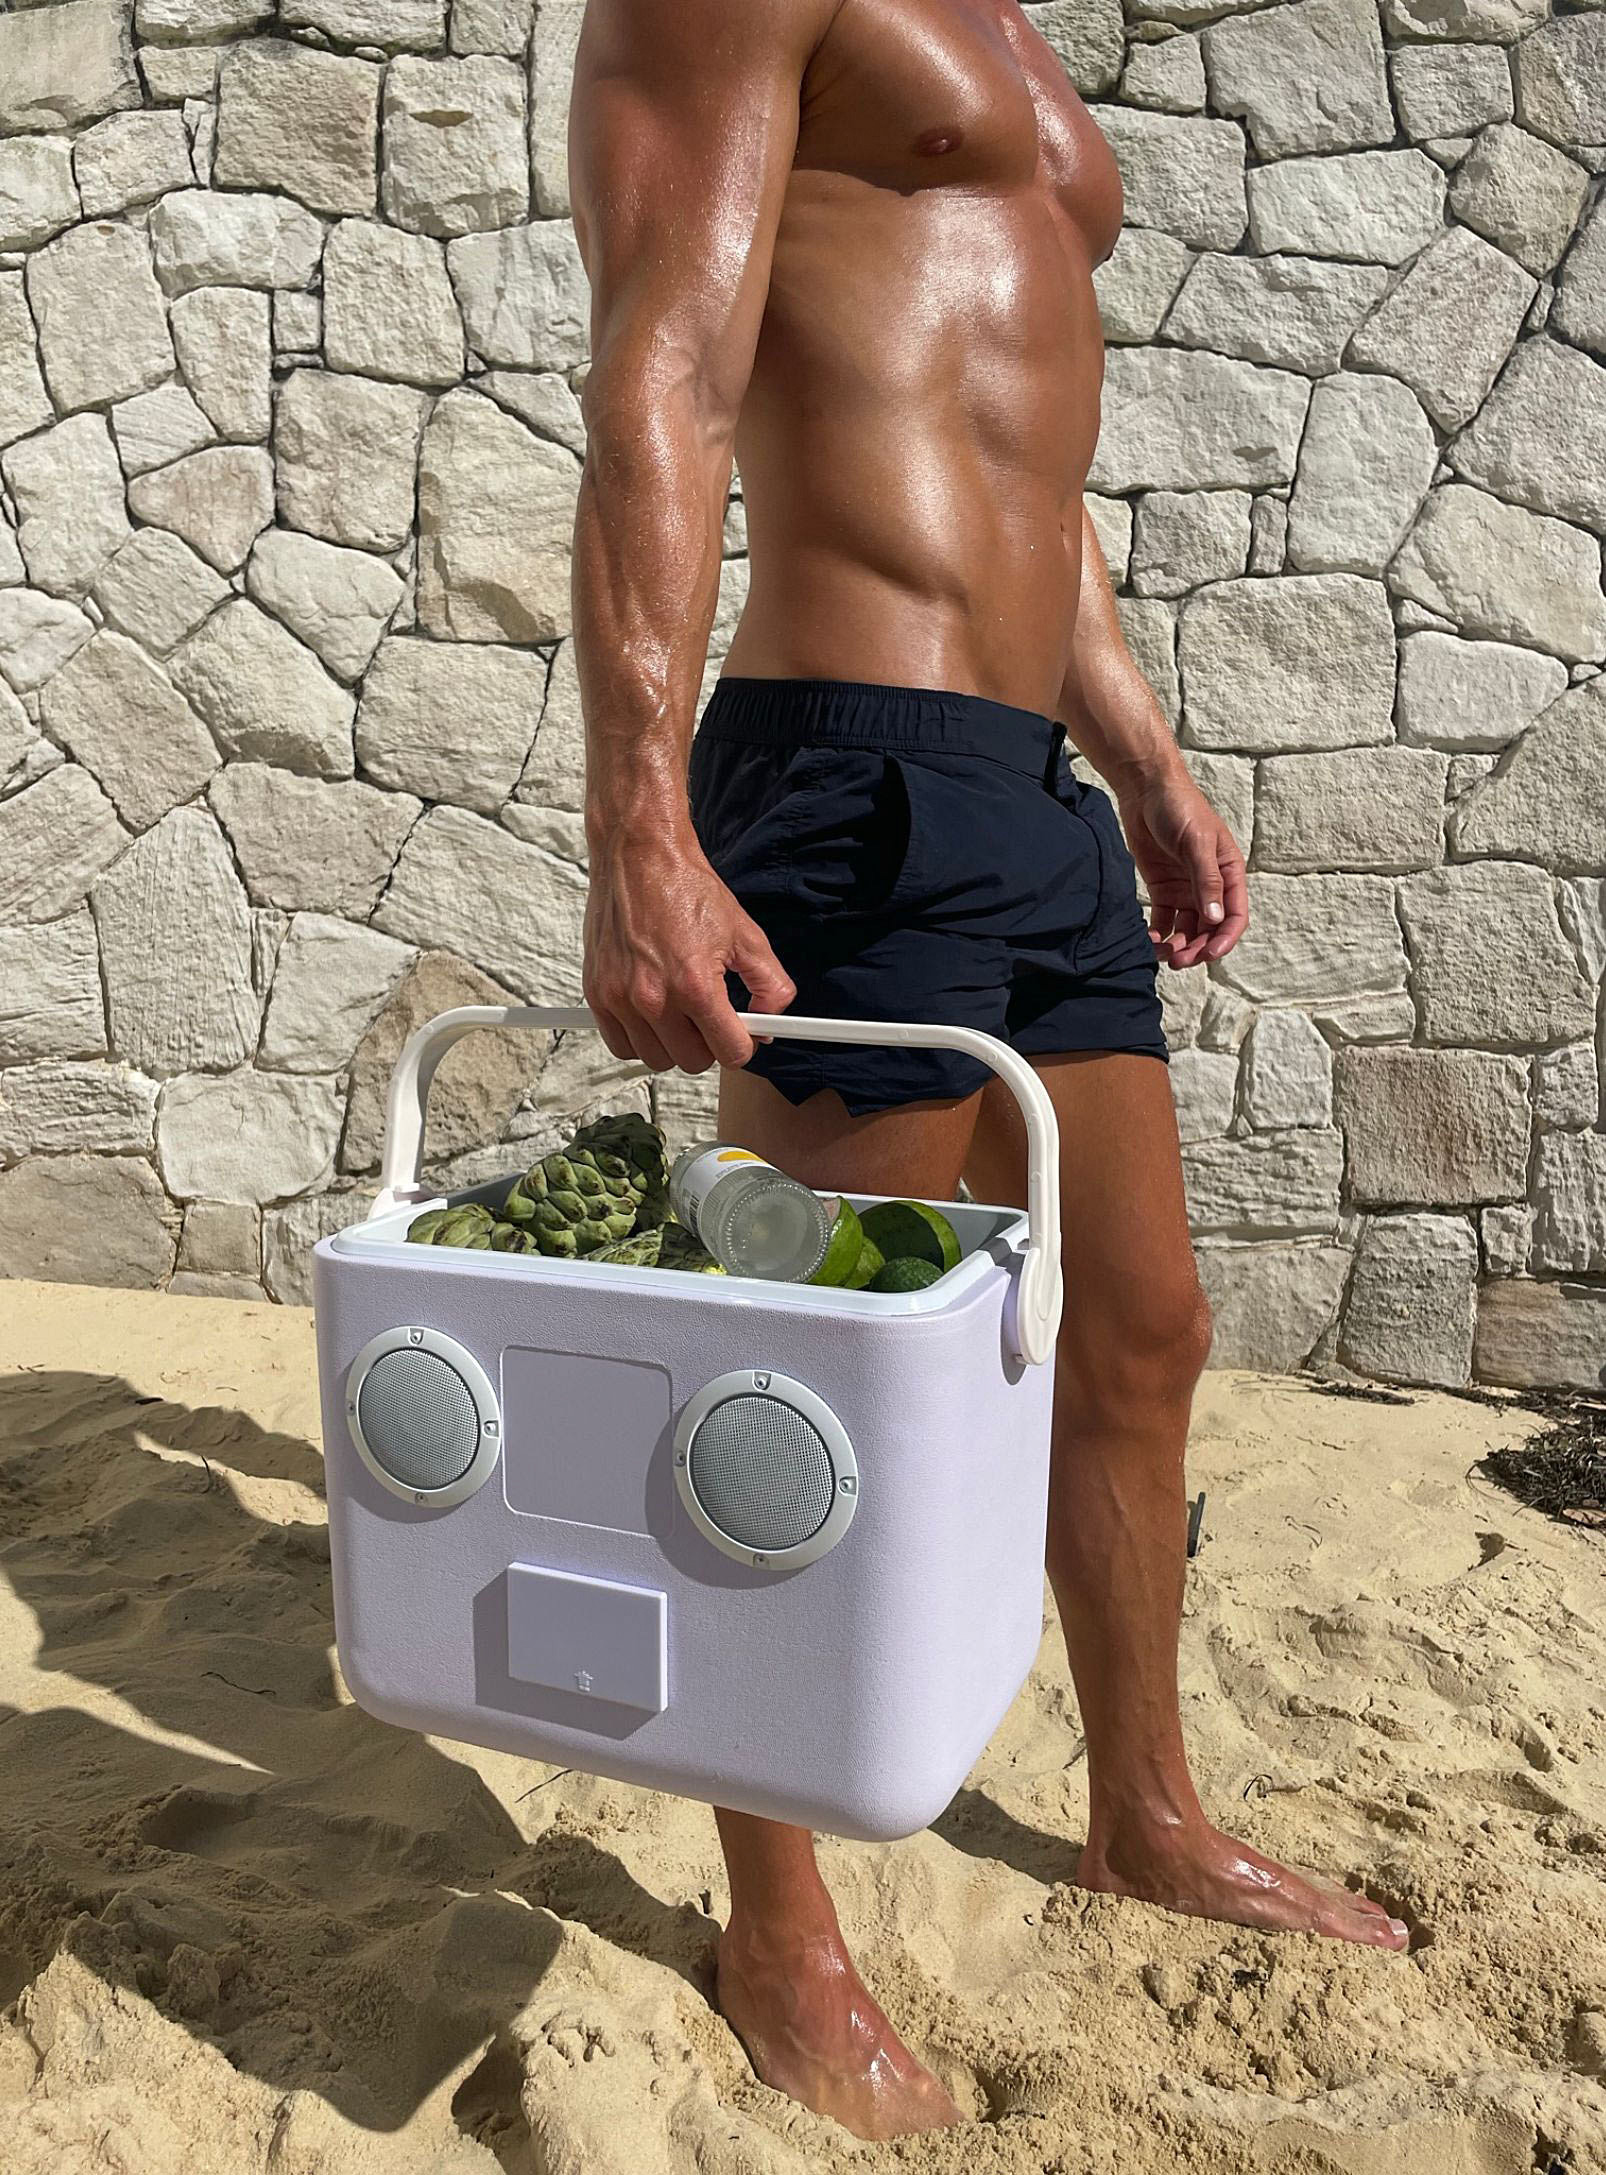 Sunnylife - Portable cooler with built-in speaker